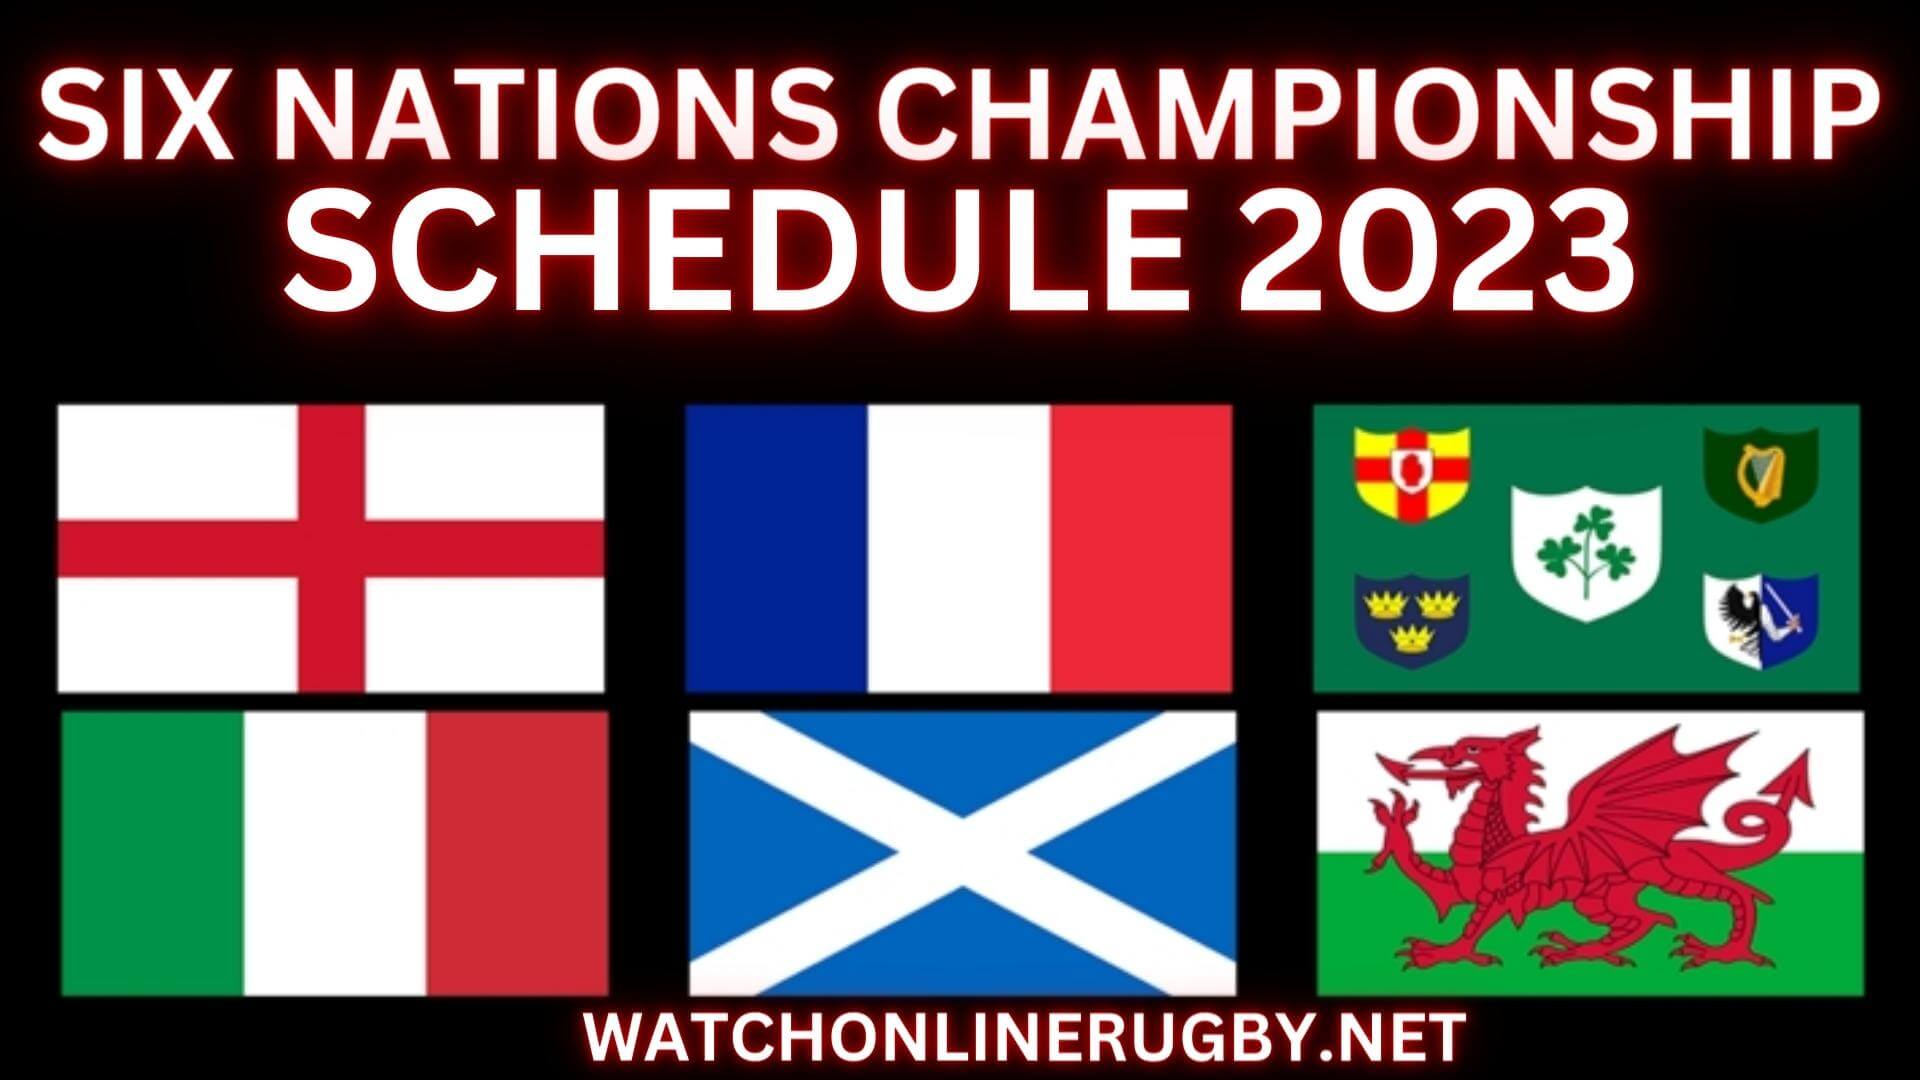 2023 Guinness Six Nations Rugby Schedule Live Stream, Date, Time, TV Channel